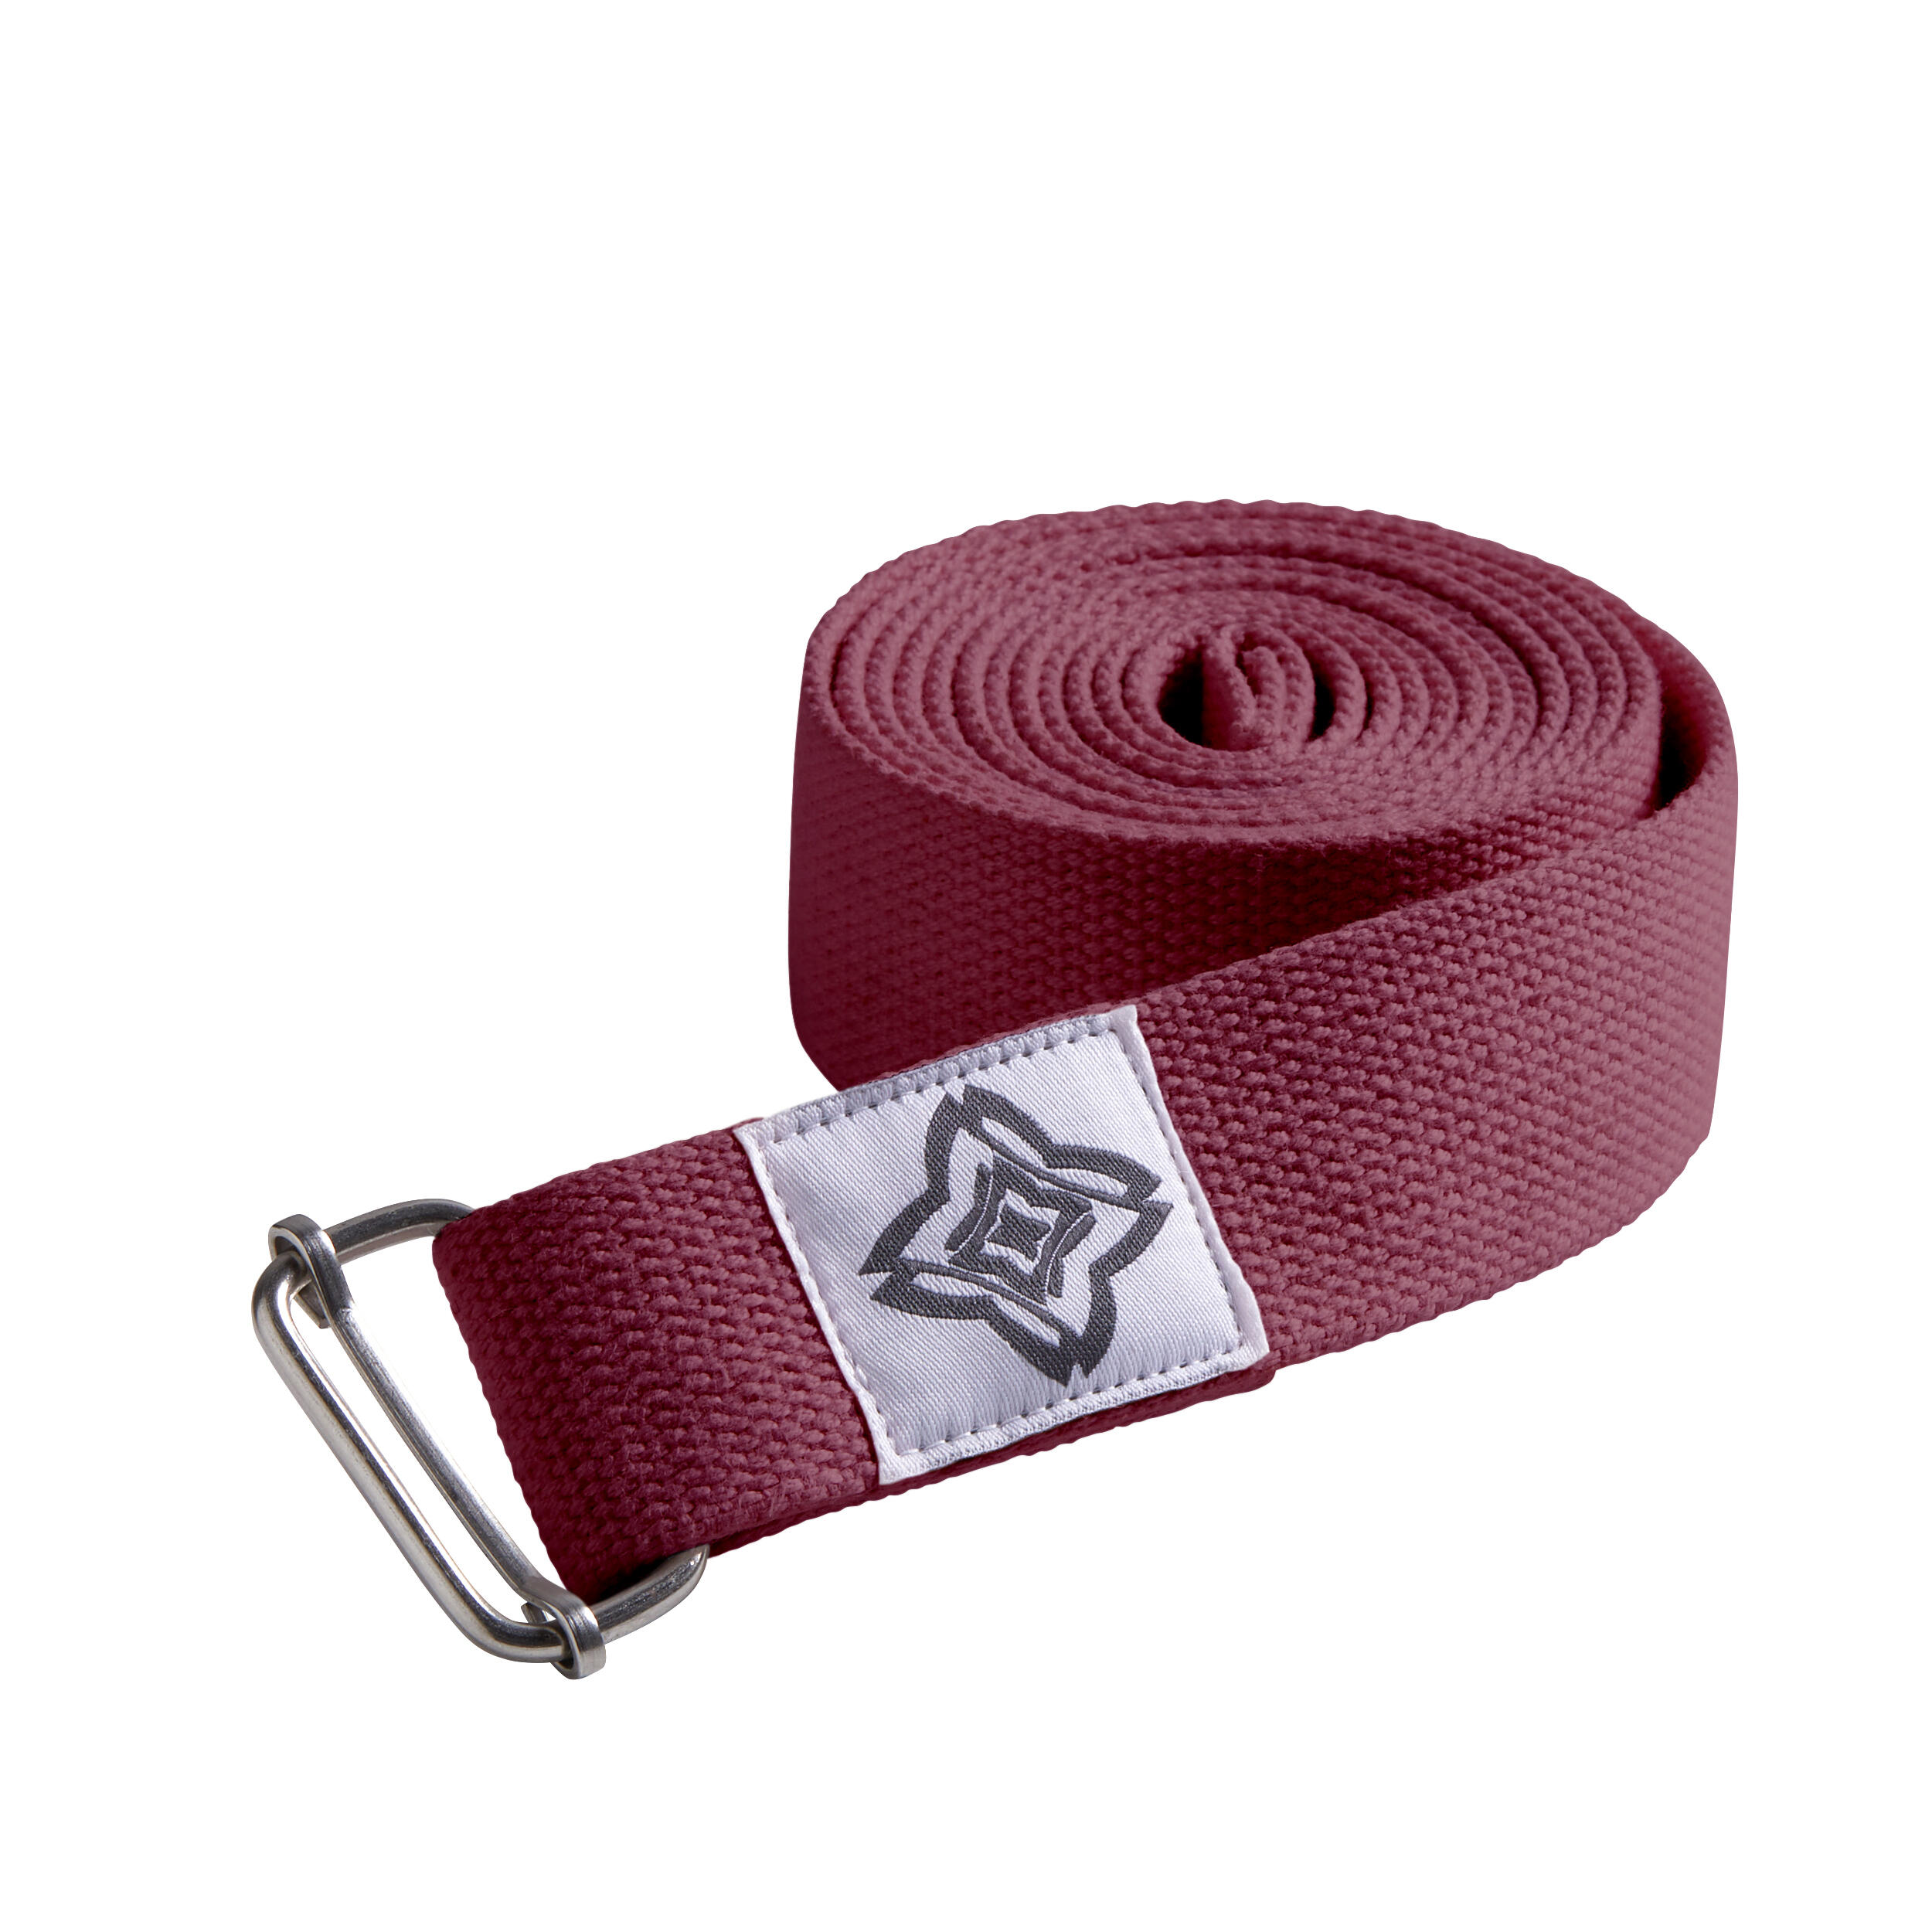 Yoga Band Yoga Stretching Strap for Flexibility 8 FT 100% Organic Cotton Lotuscrafts Yoga Strap for Stretching Yoga Belt Strap with Adjustable D-Ring Buckle 